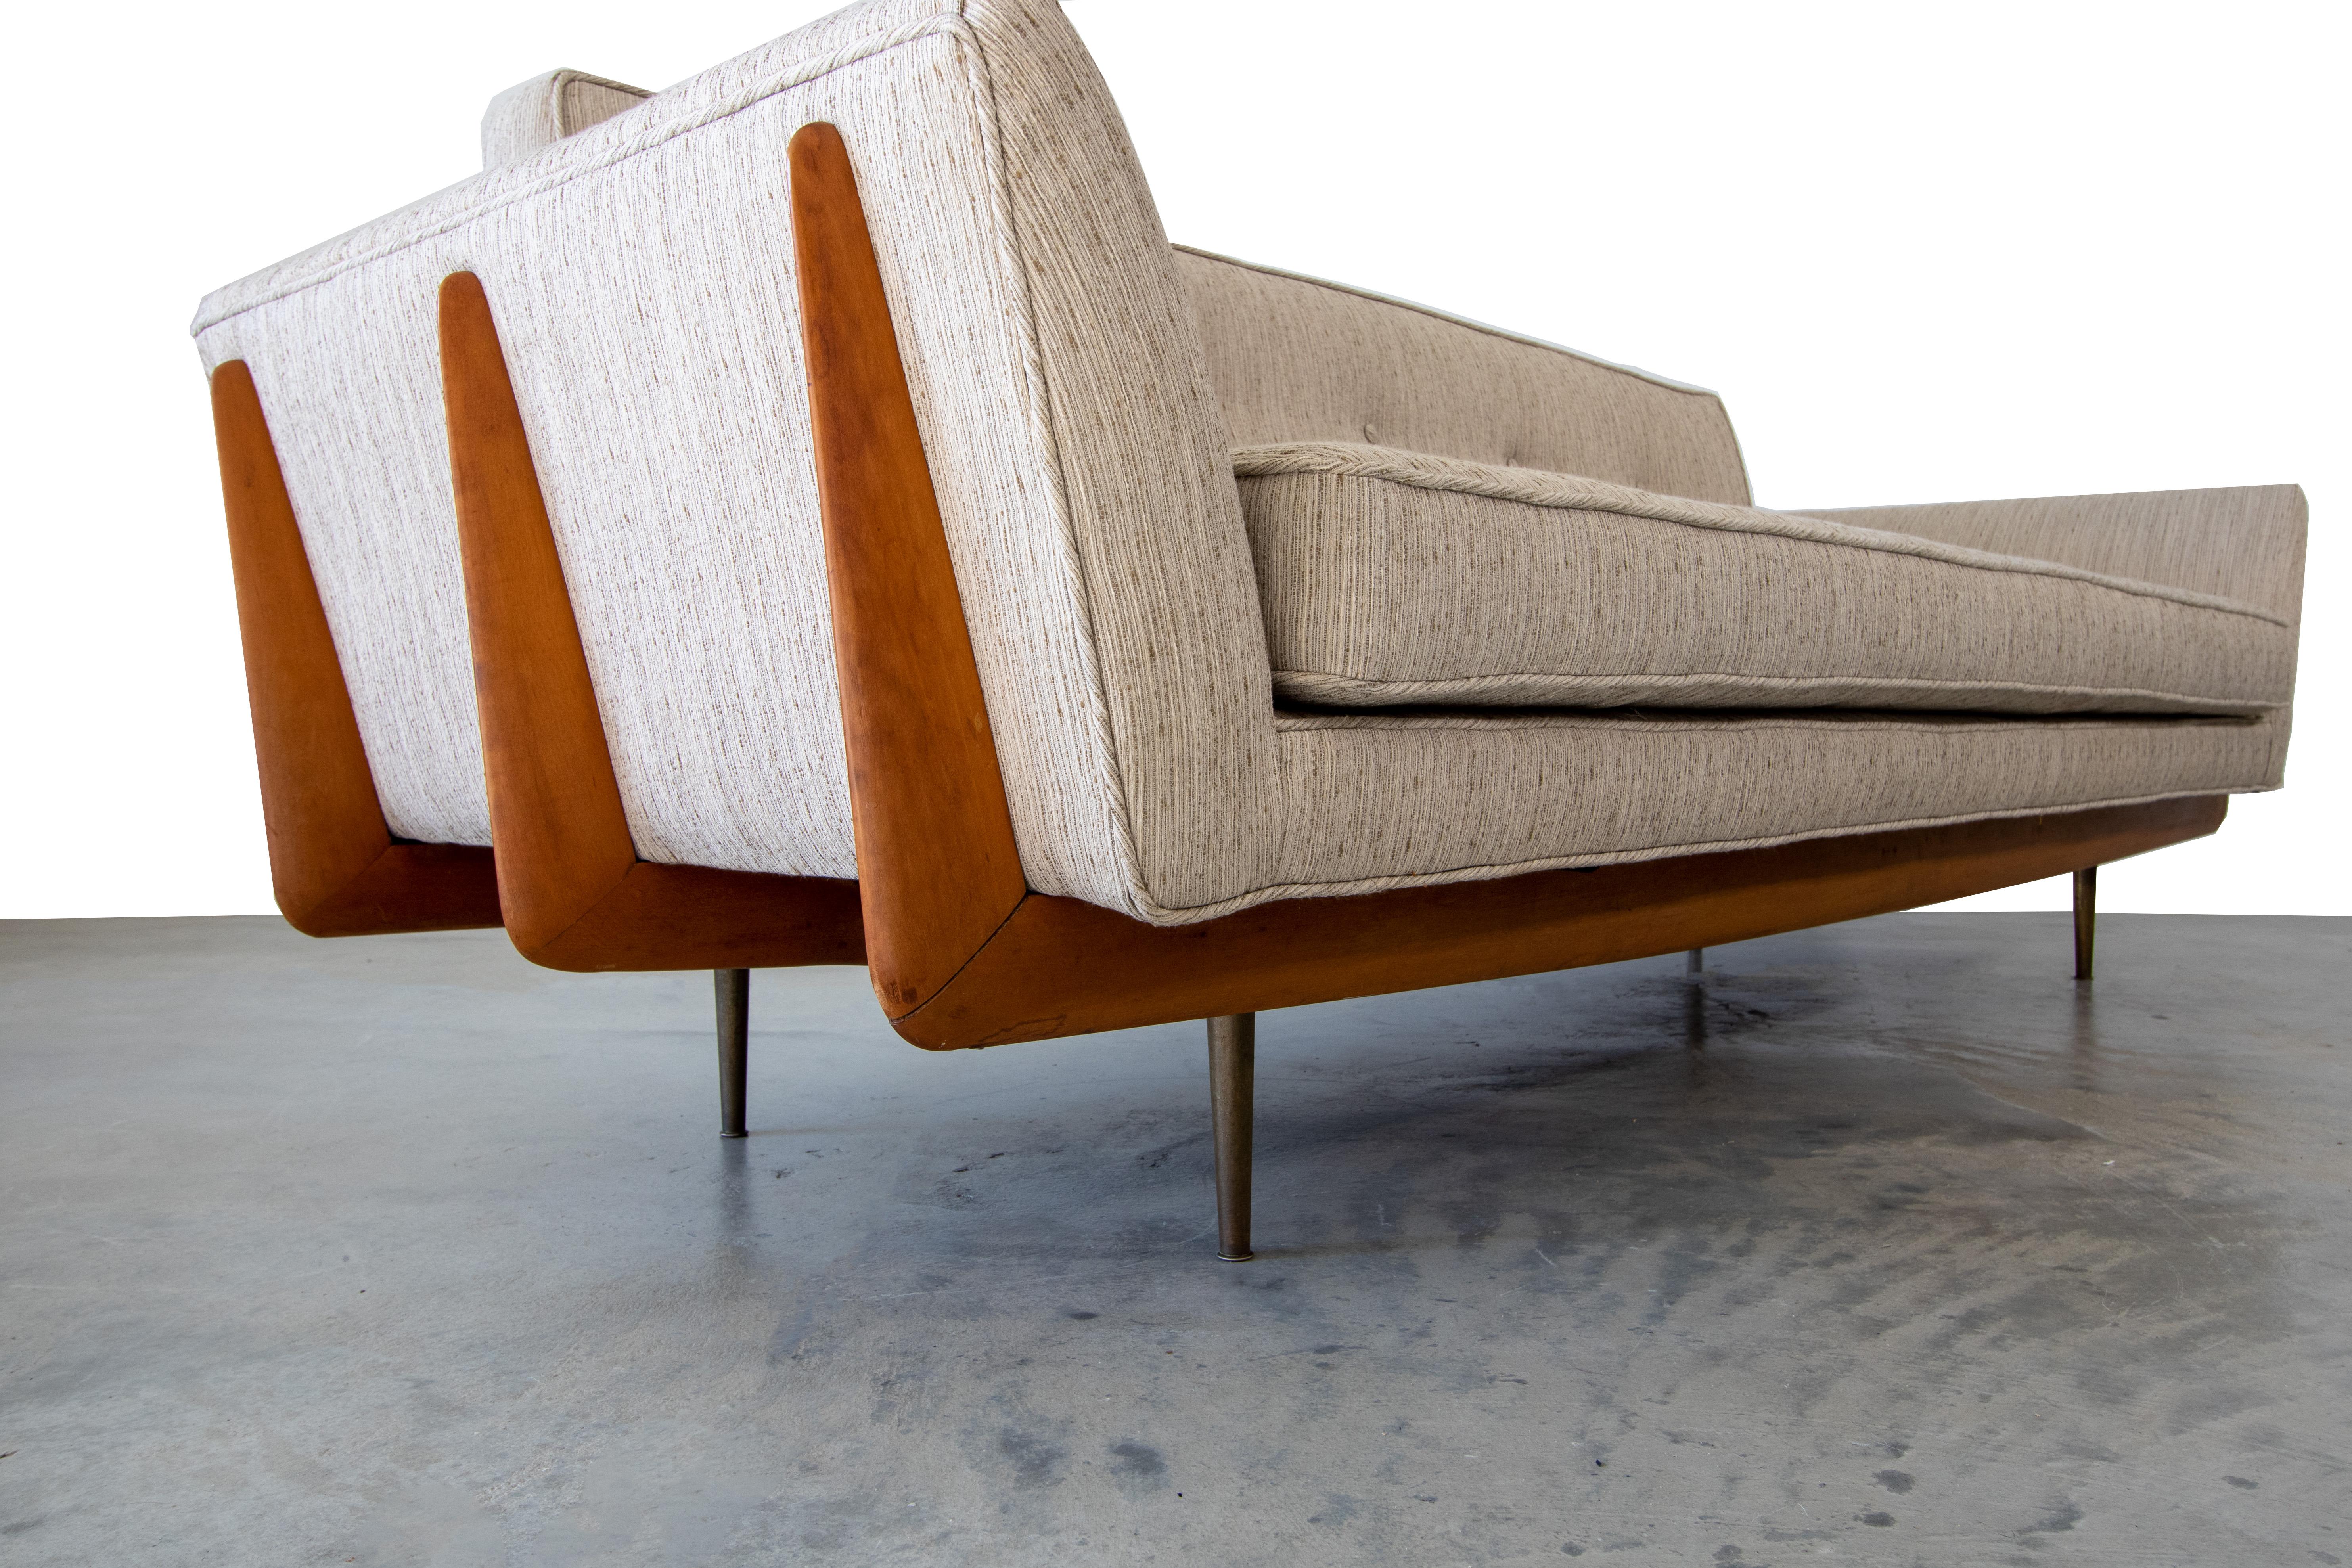 This Mid-Century Modern sofa has it all. Cradle frame with solid wood fin sides, split arms, and brass legs, no design elements were overlooked.. Designed by the team of Robinson and Johnson of Artcraft of Atlanta, little is known about this